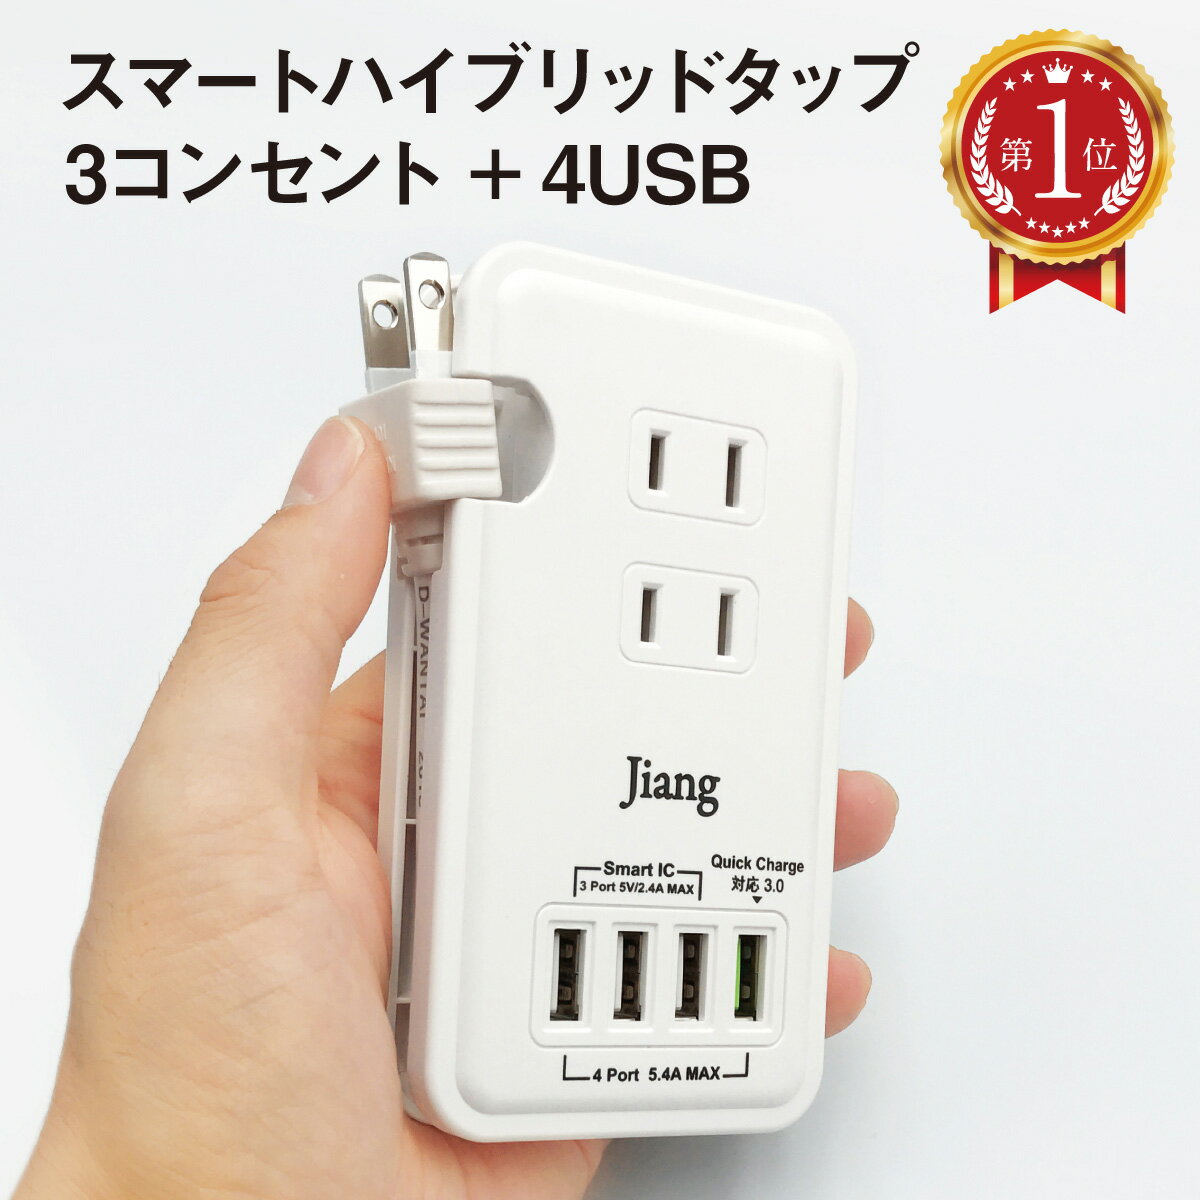 ACアダプター <strong>USB</strong> 急速 ACアダプタ スマートタップ コンセント タップ 4ポート usb 4口 5.4A <strong>充電器</strong> チャージャー <strong>USB</strong><strong>充電器</strong> コンセント 3口 1400W 電源タップ 軽量 同時充電 アダプター <strong>USB</strong>タップ <strong>USB</strong>アダプタ スマホ<strong>充電器</strong> Quick Charger 3.0A対応 jiang-tap01